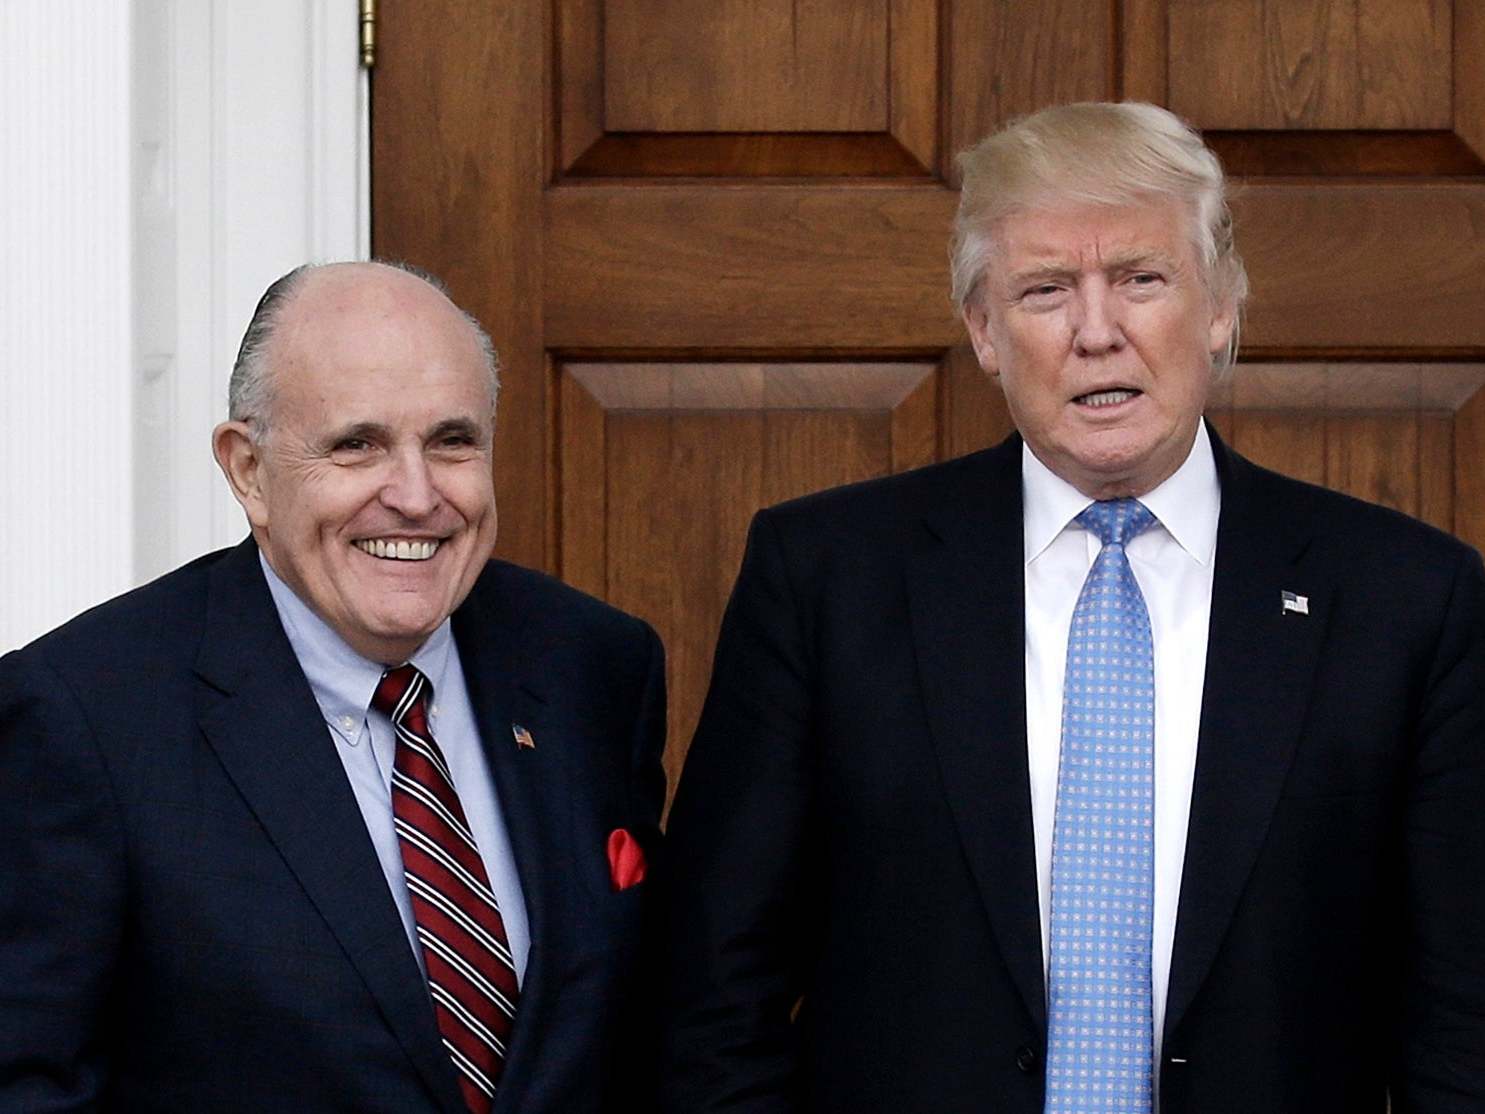 Trump with his personal lawyer, Rudy Giuliani